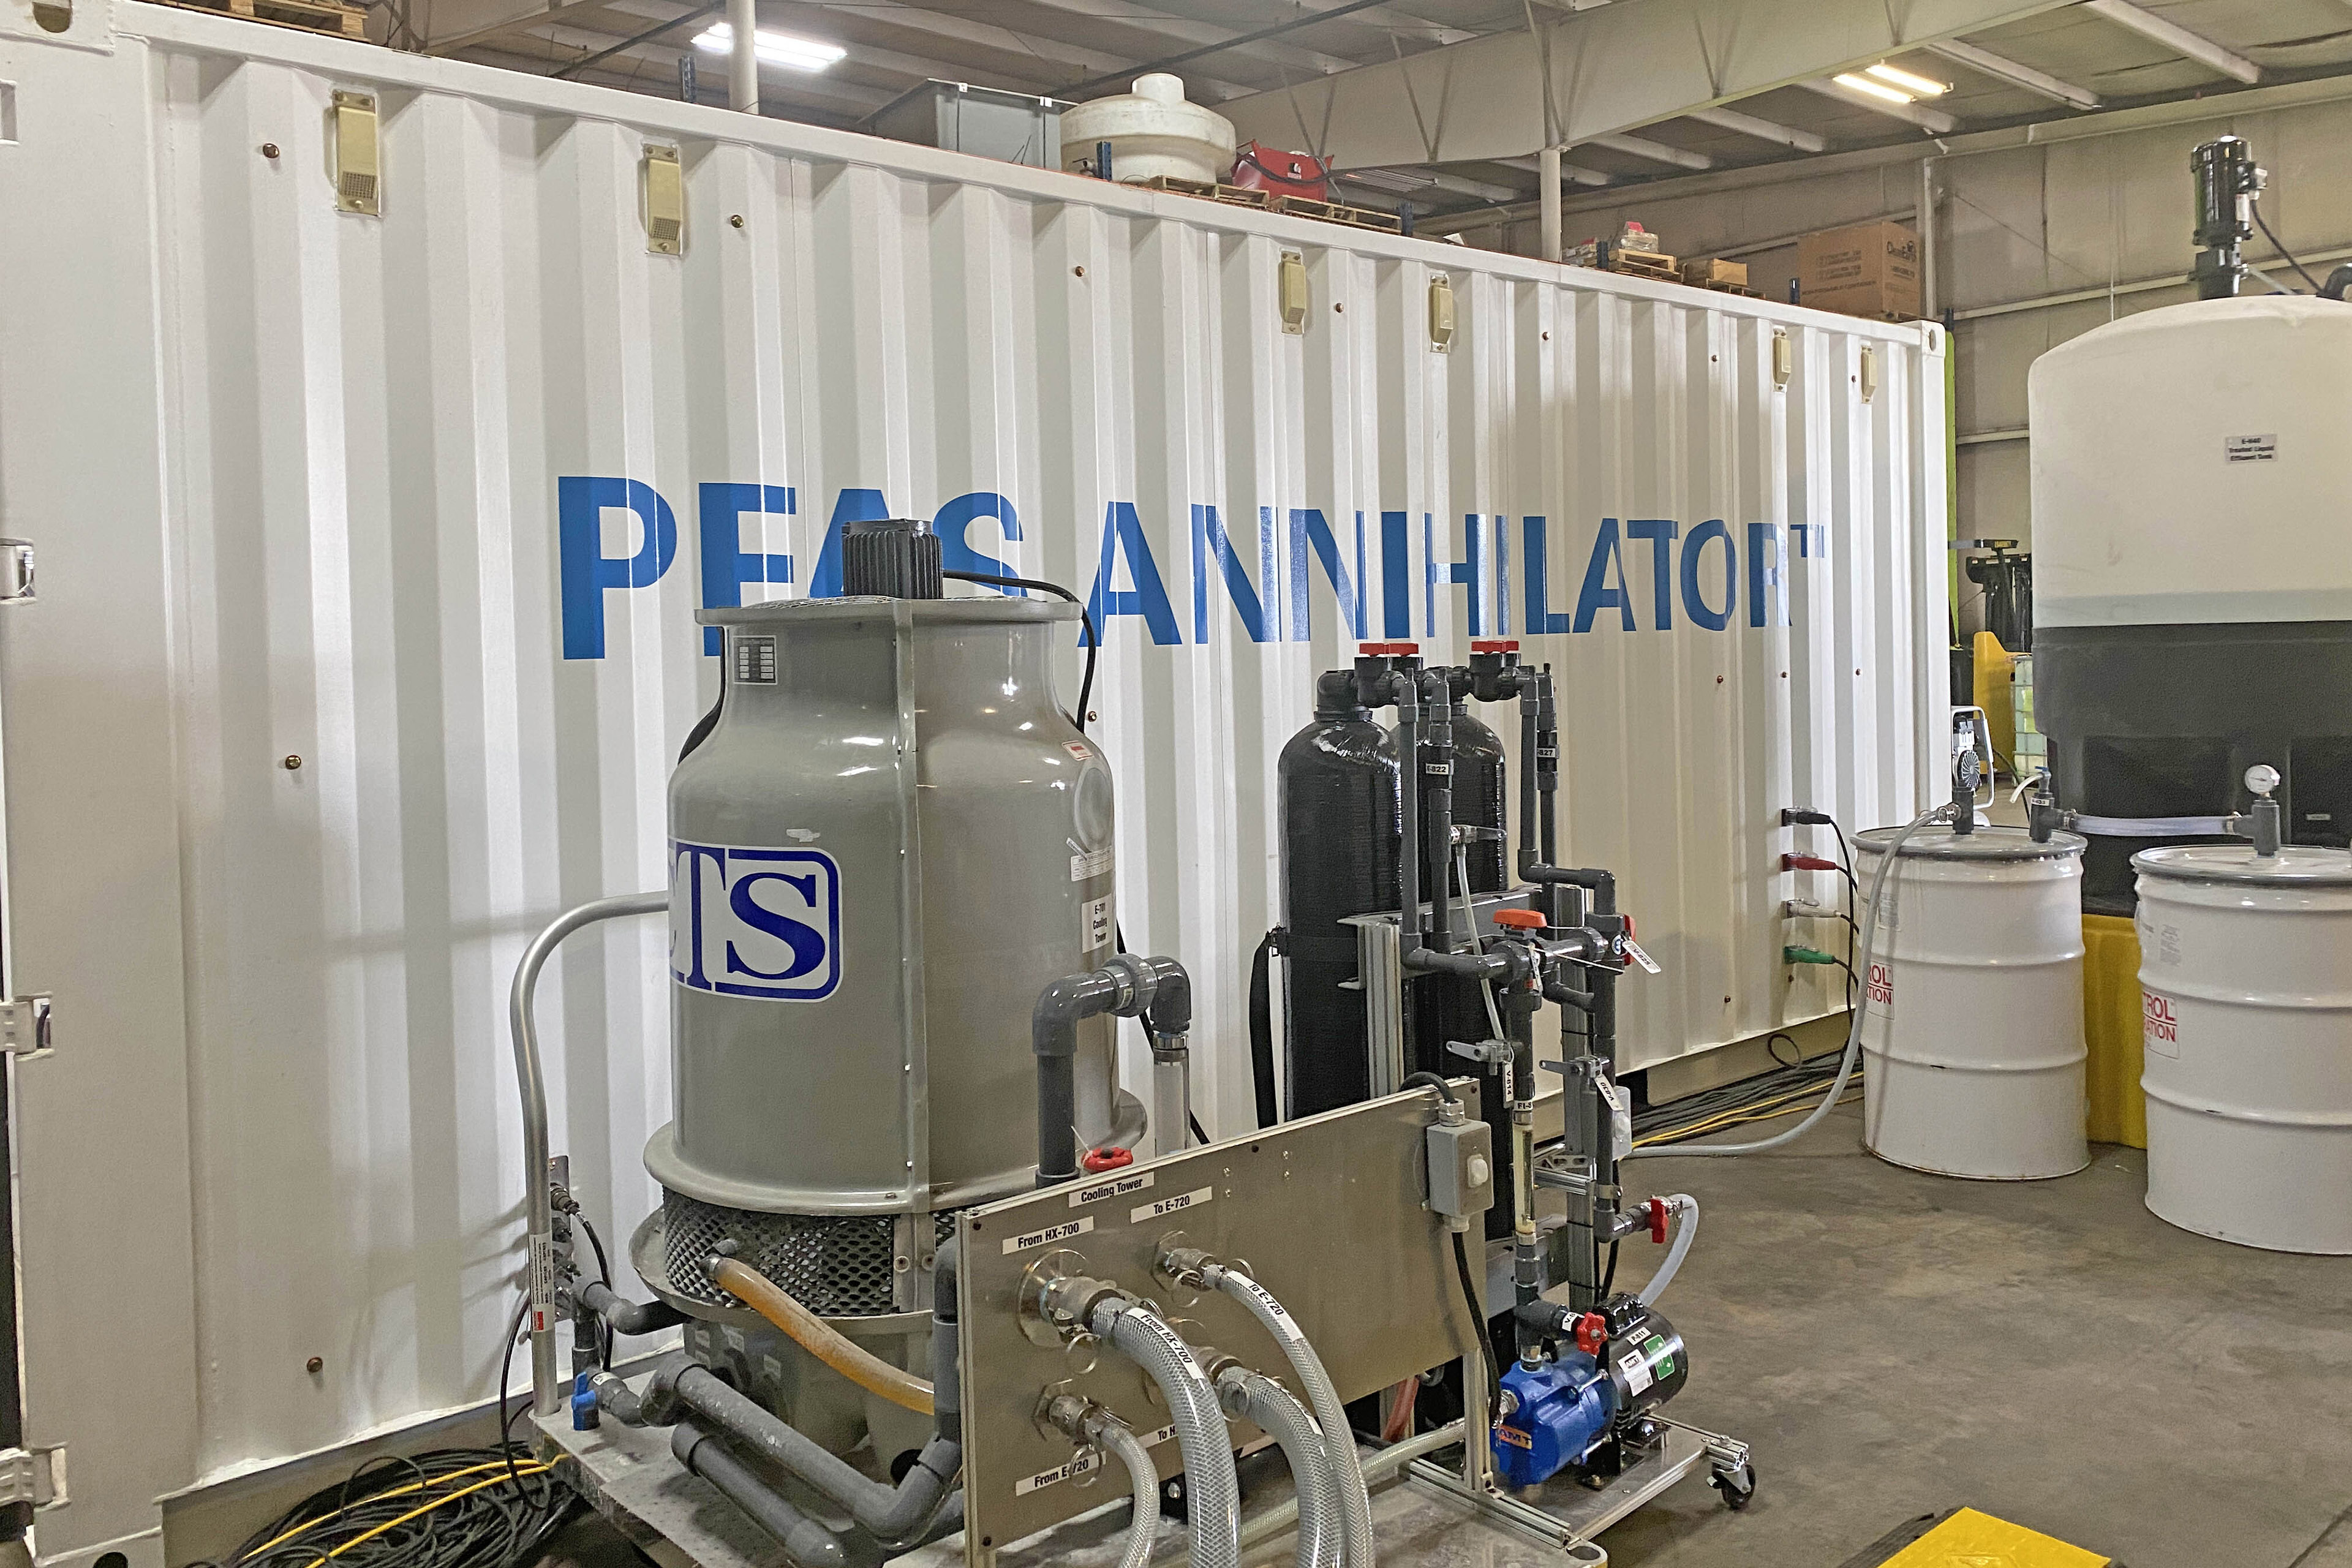 A photograph of a mobile supercritical water oxidation system, called the “PFAS Annihilator,” that is the size of two shipping containers and operates at a wastewater treatment facility.